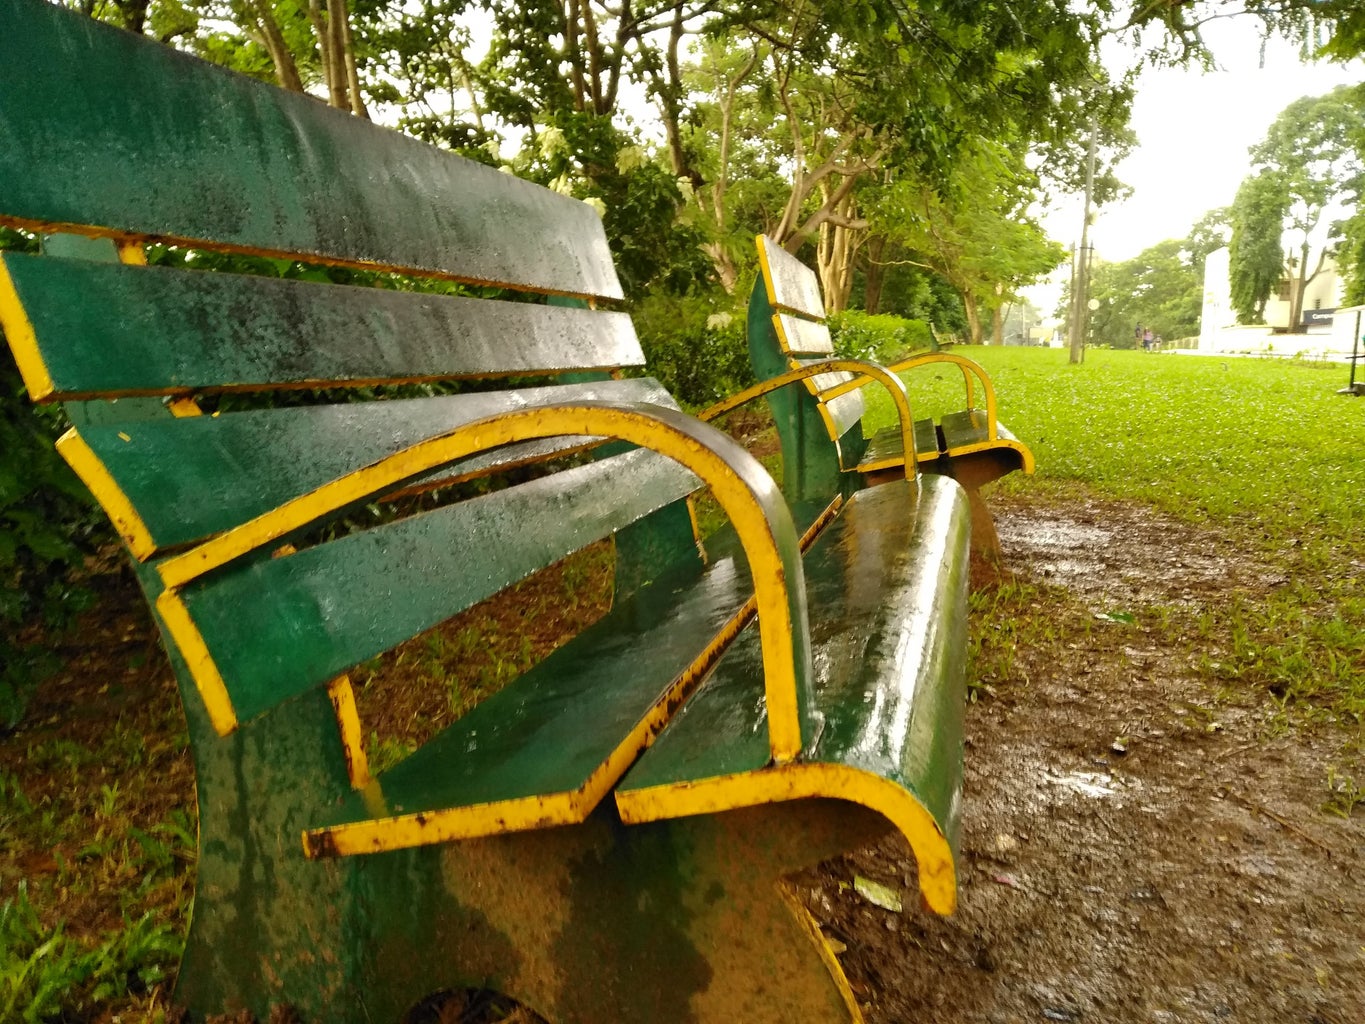 benches in manipal on a rainy day